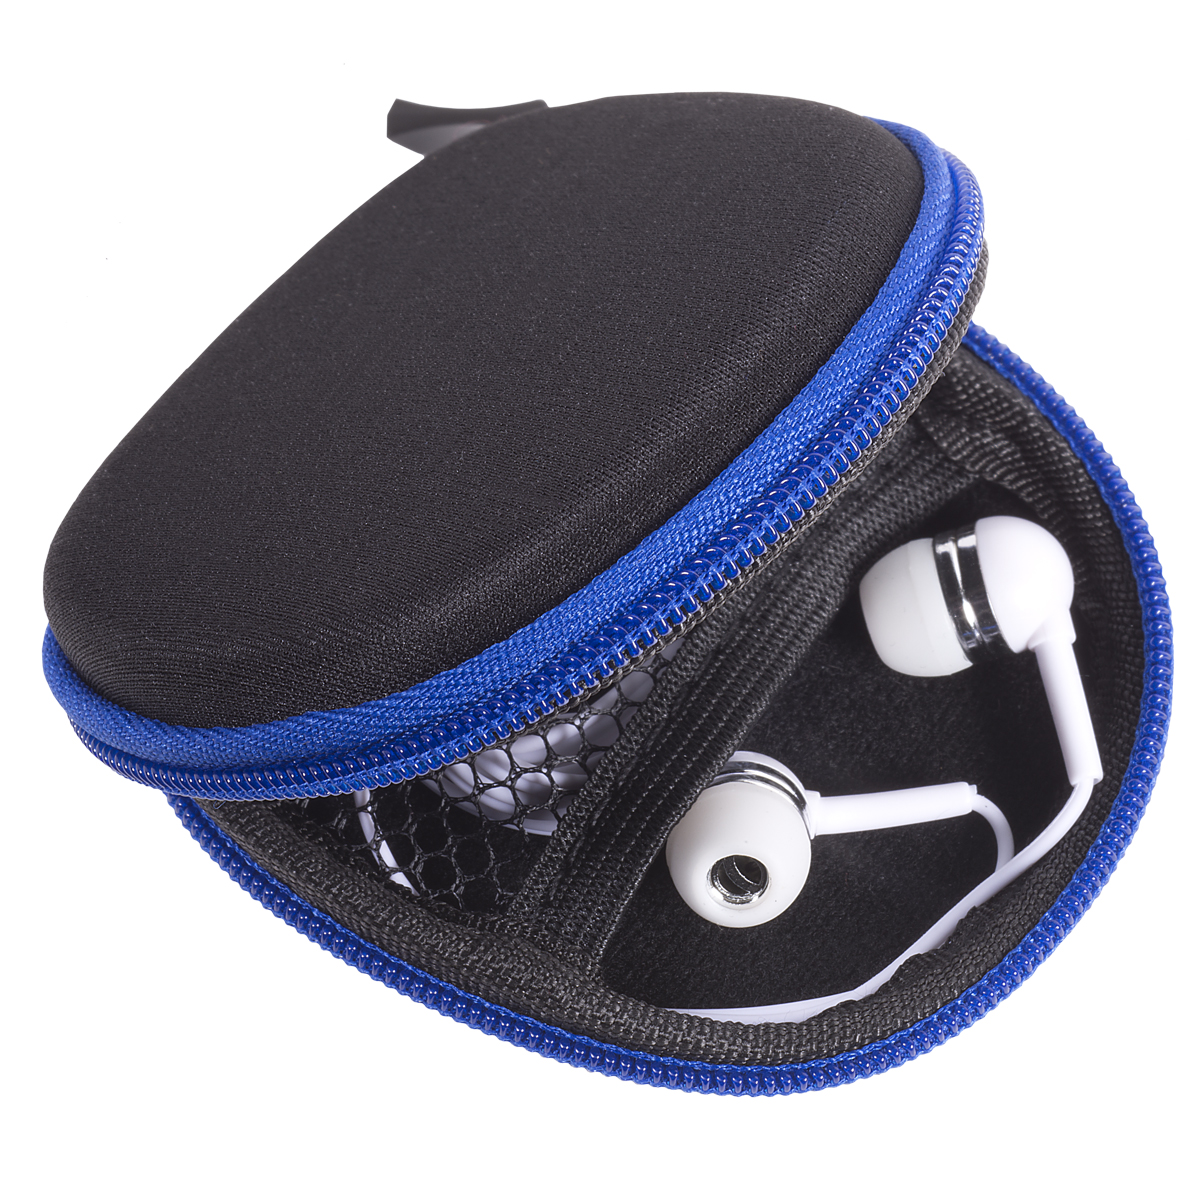 Tough Tech™ Pouch with Earbuds & Lens Wipe